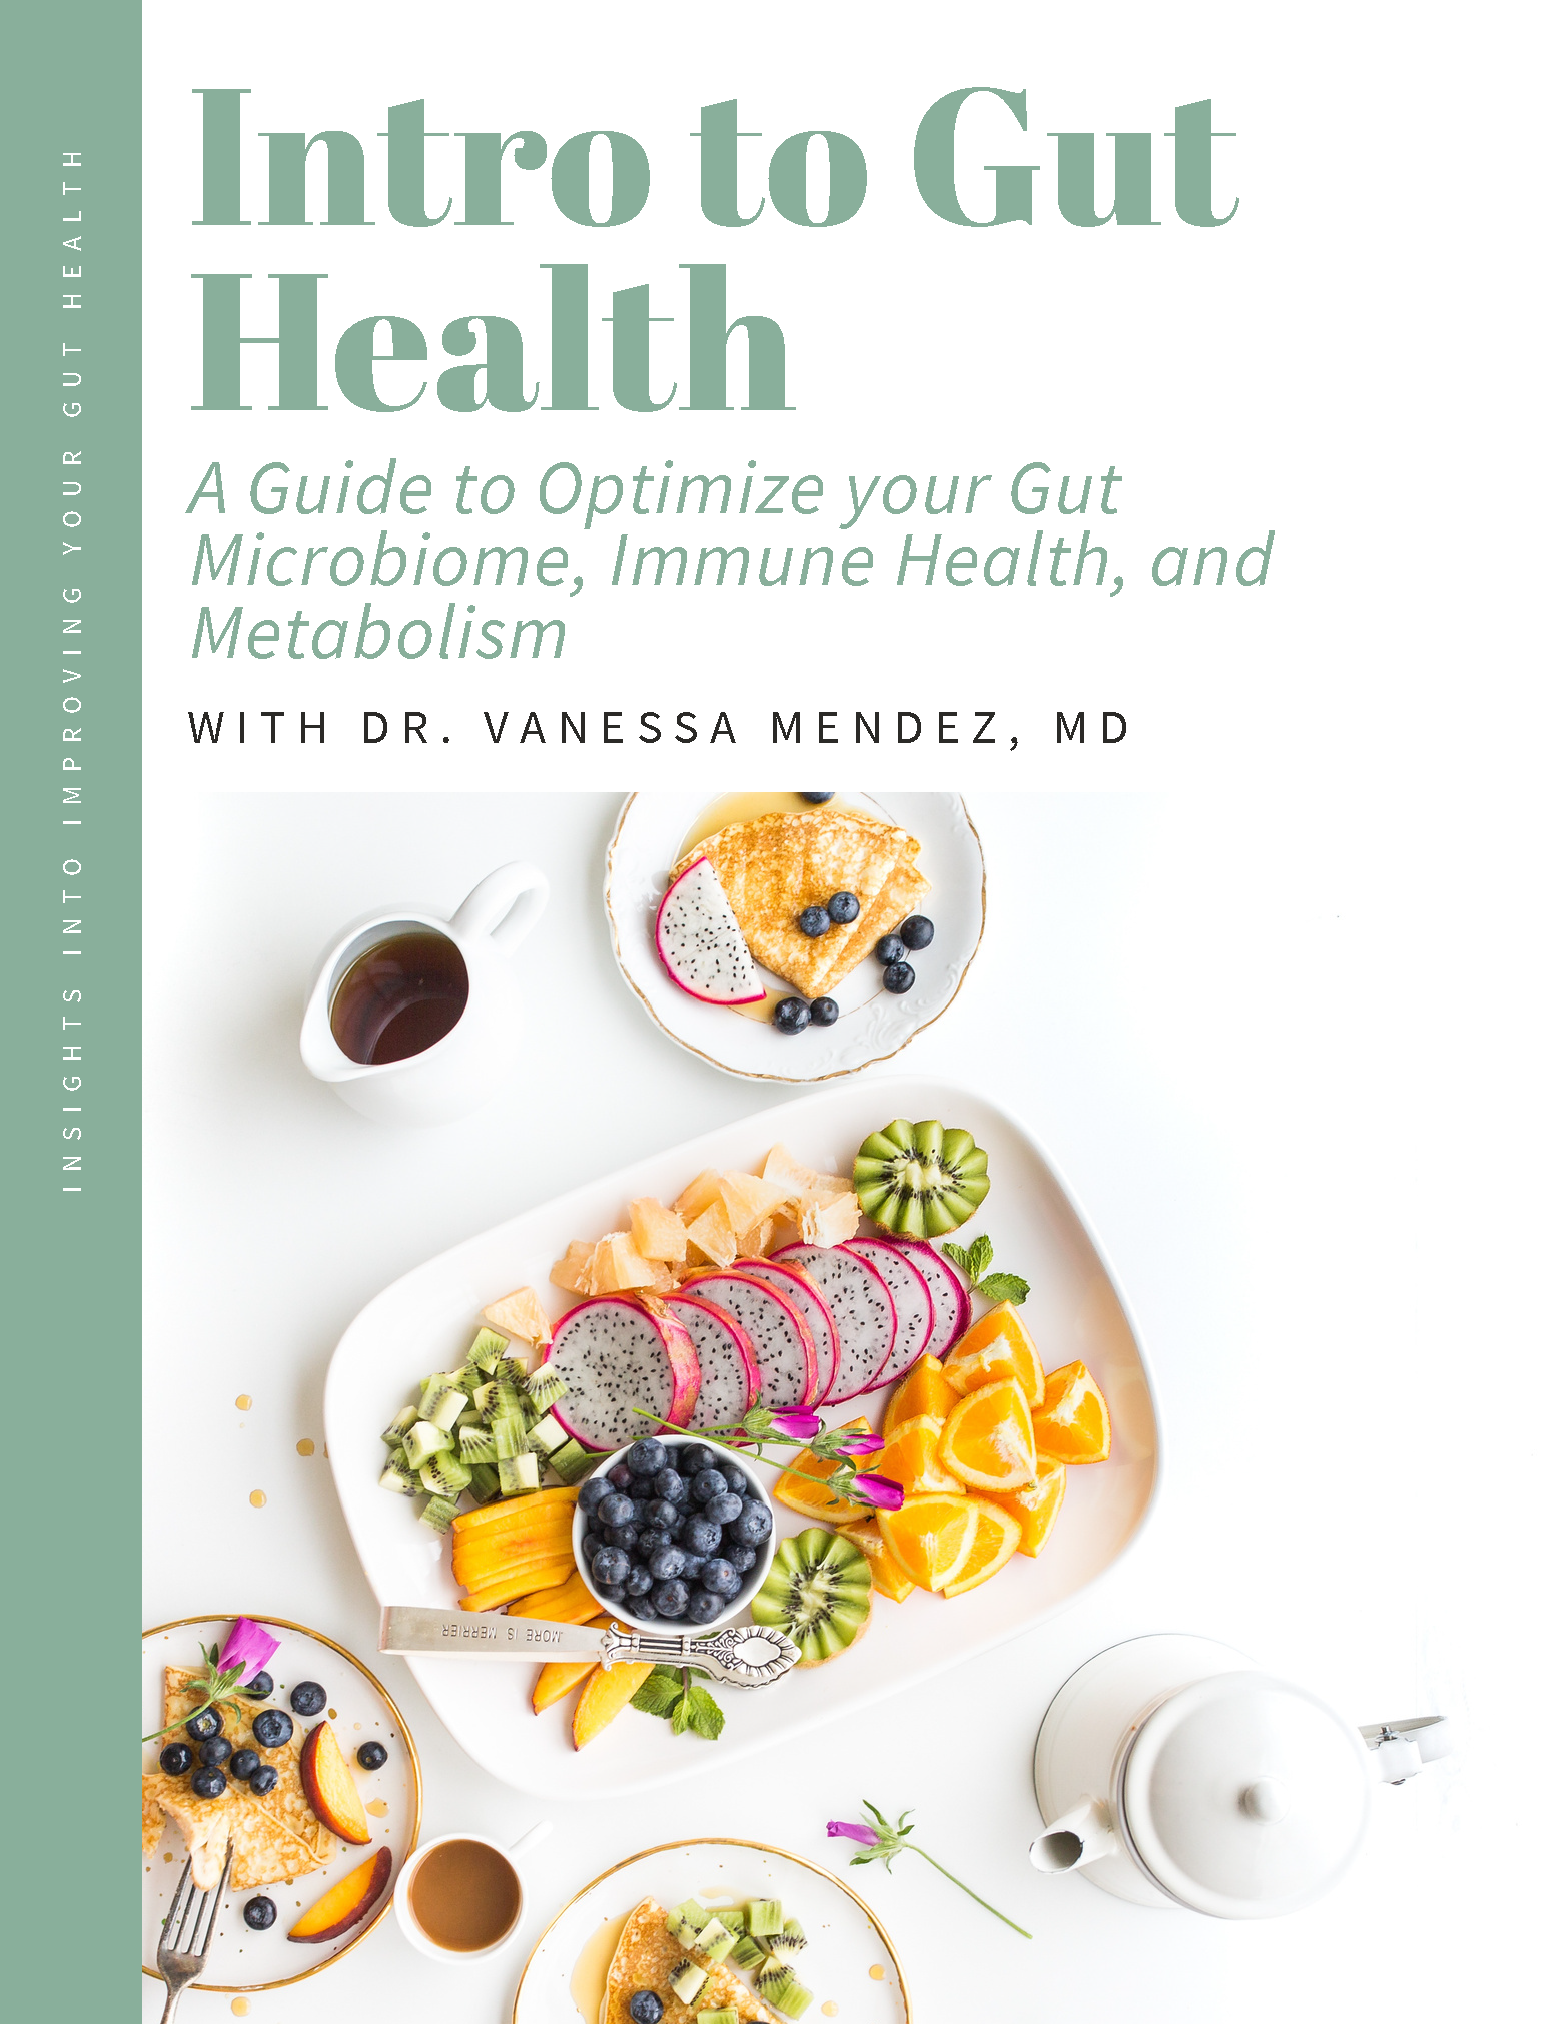 Intro to GUT HEALTH